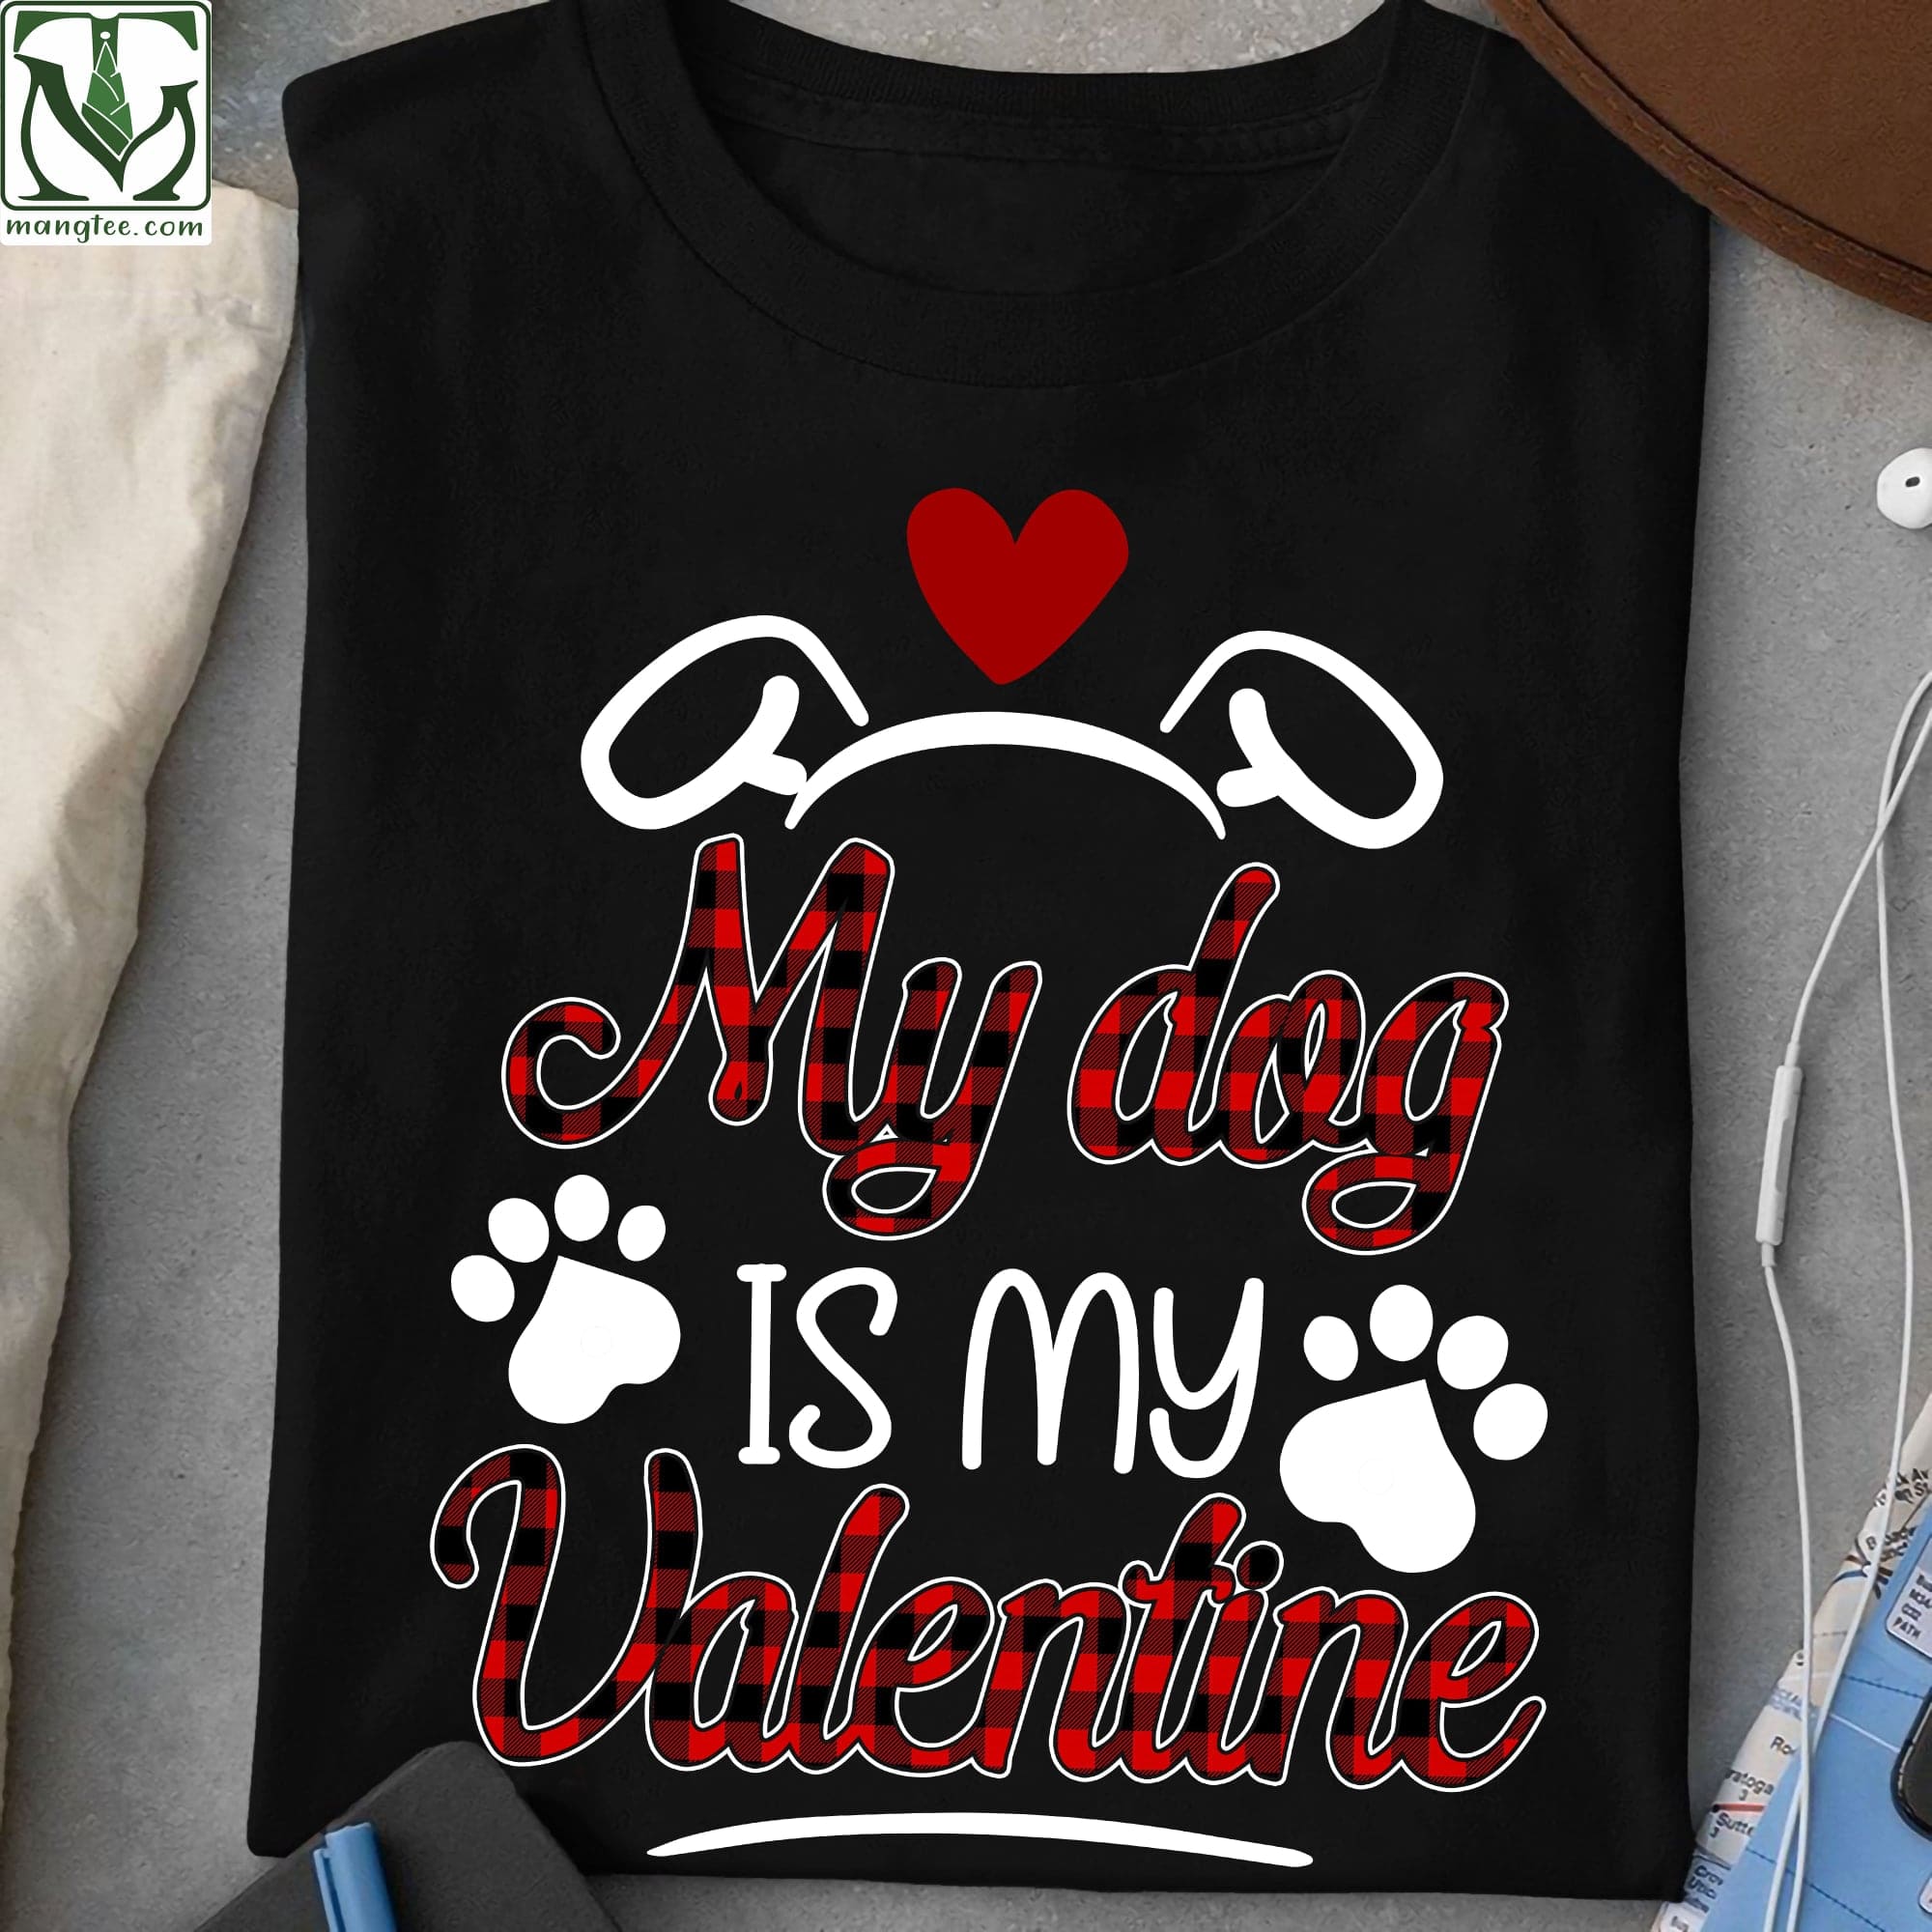 My dog is my valentine - Dog footprint graphic T-shirt, gift for dog lover, valentine day of love